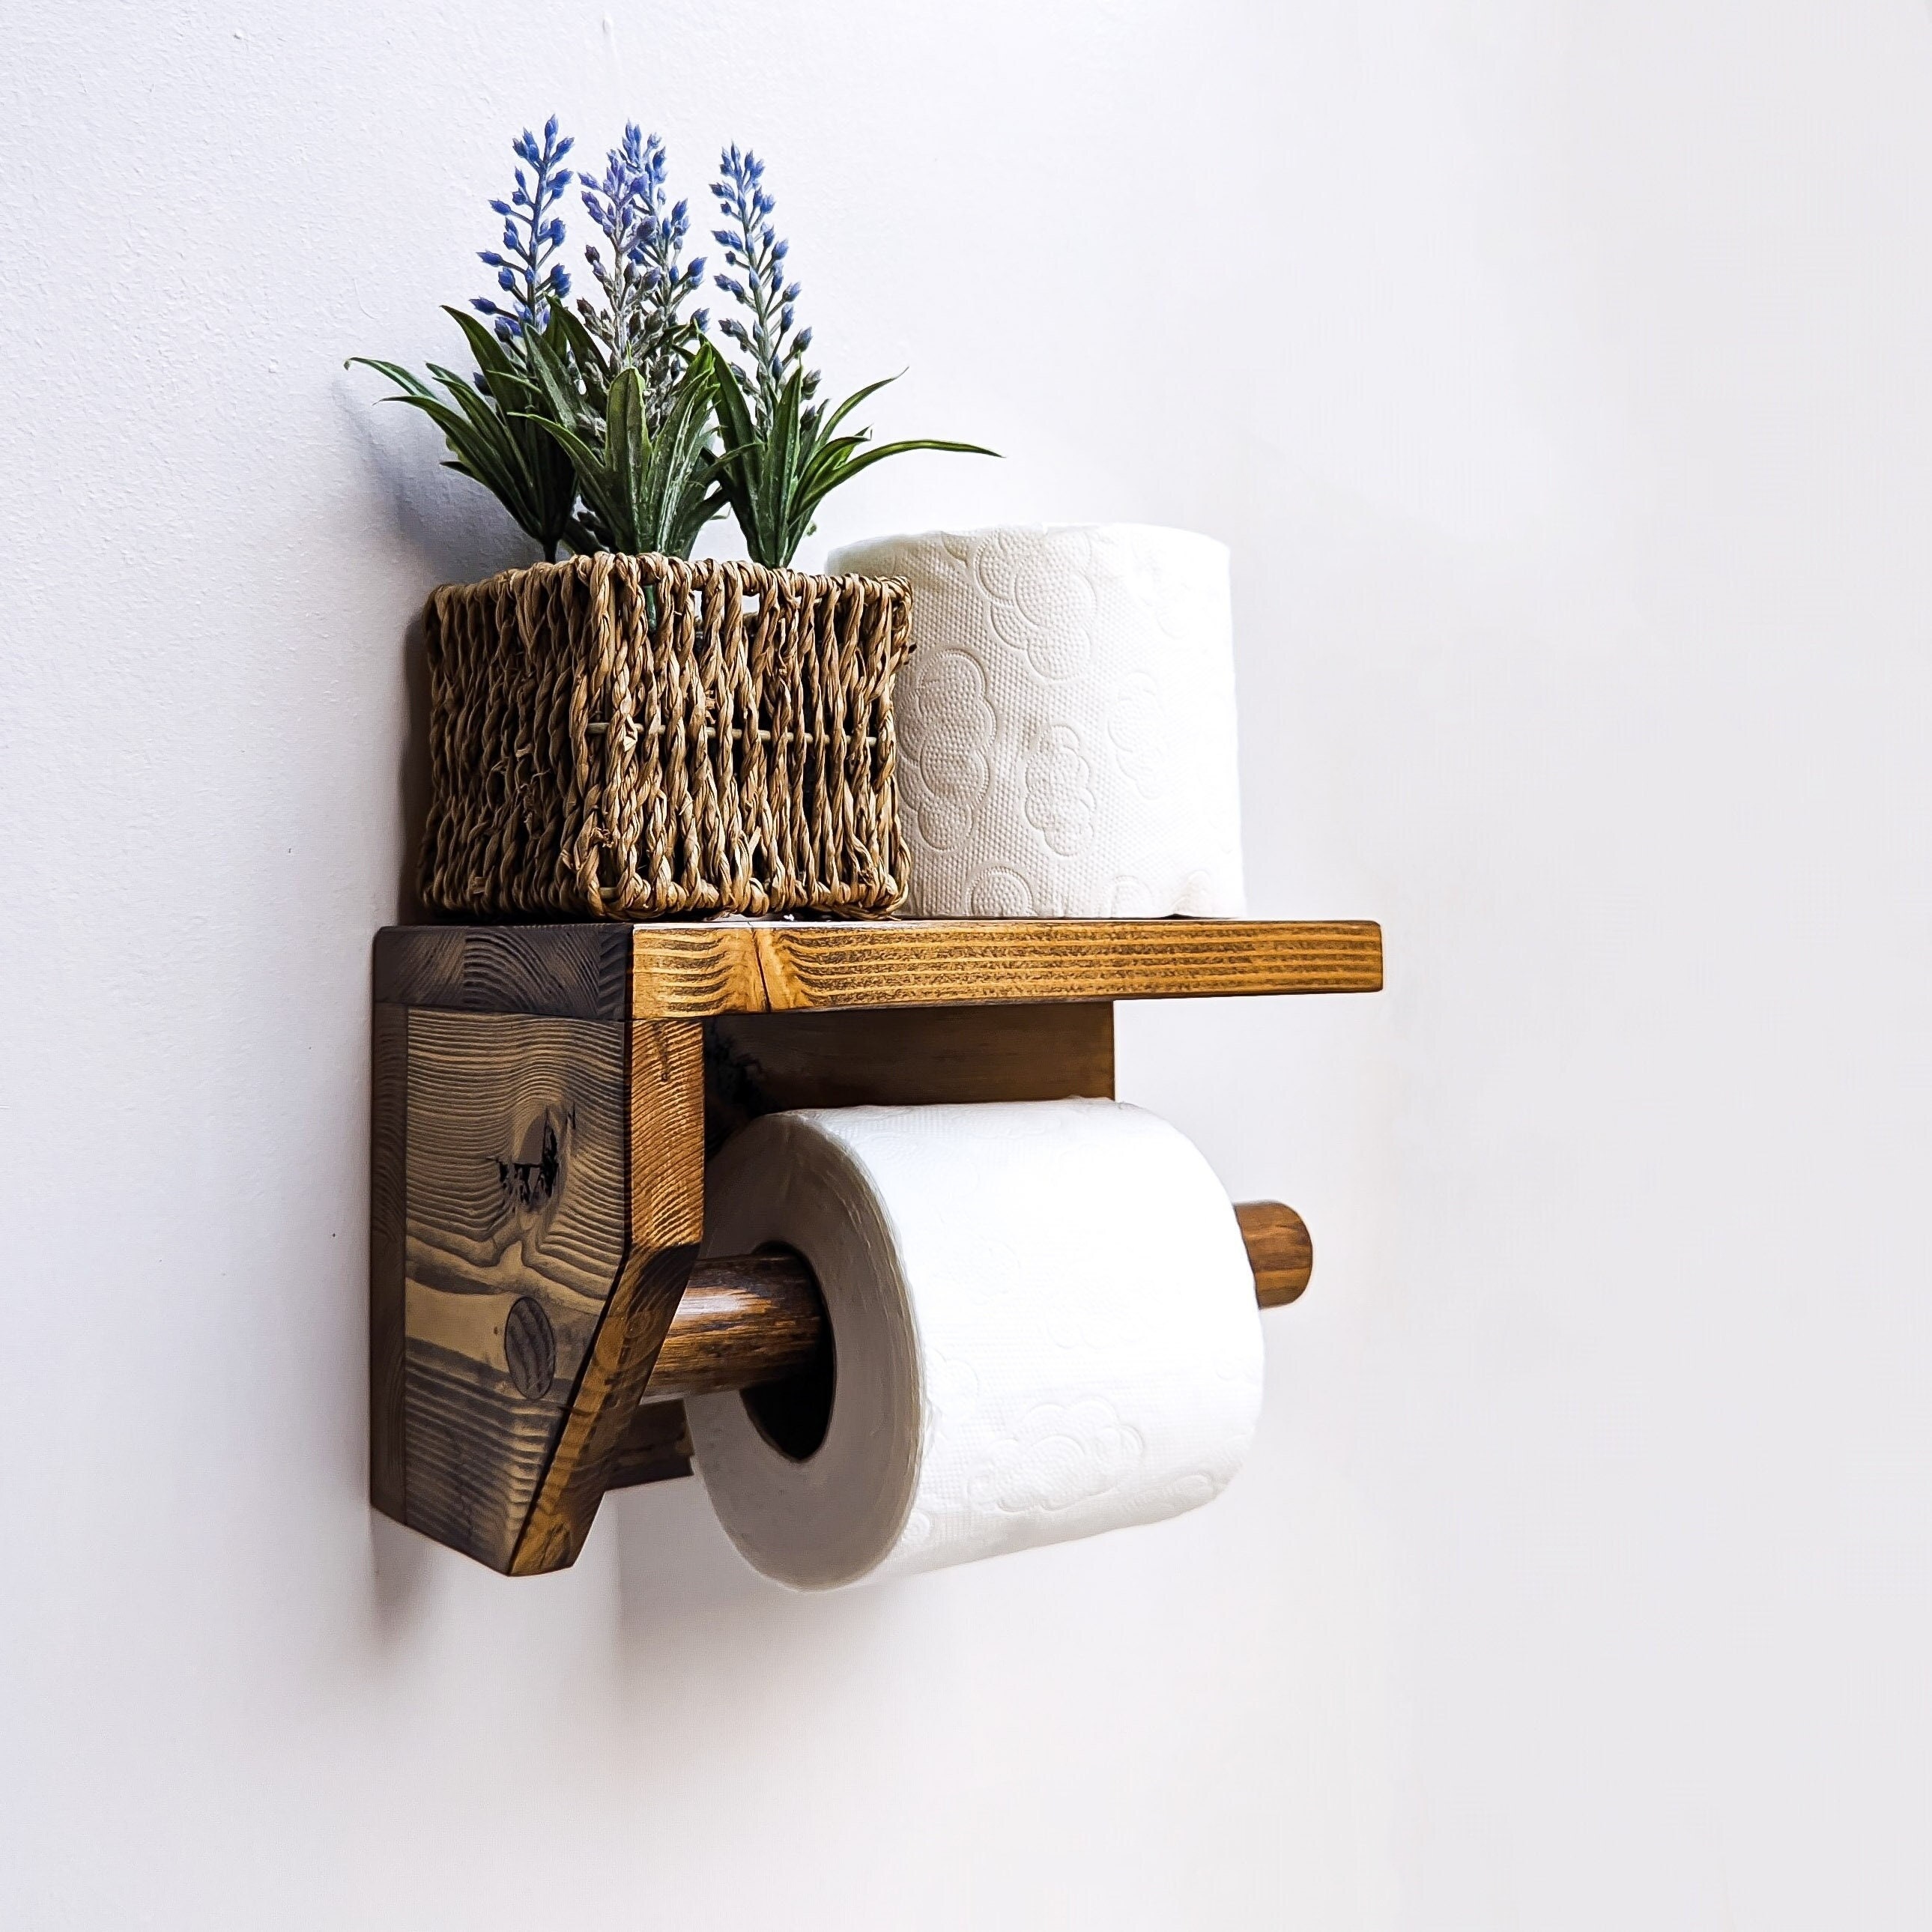 relé productos quimicos abuela Wall Mounted Toilet Roll Holder With Shelf From Reclaimed - Etsy Israel